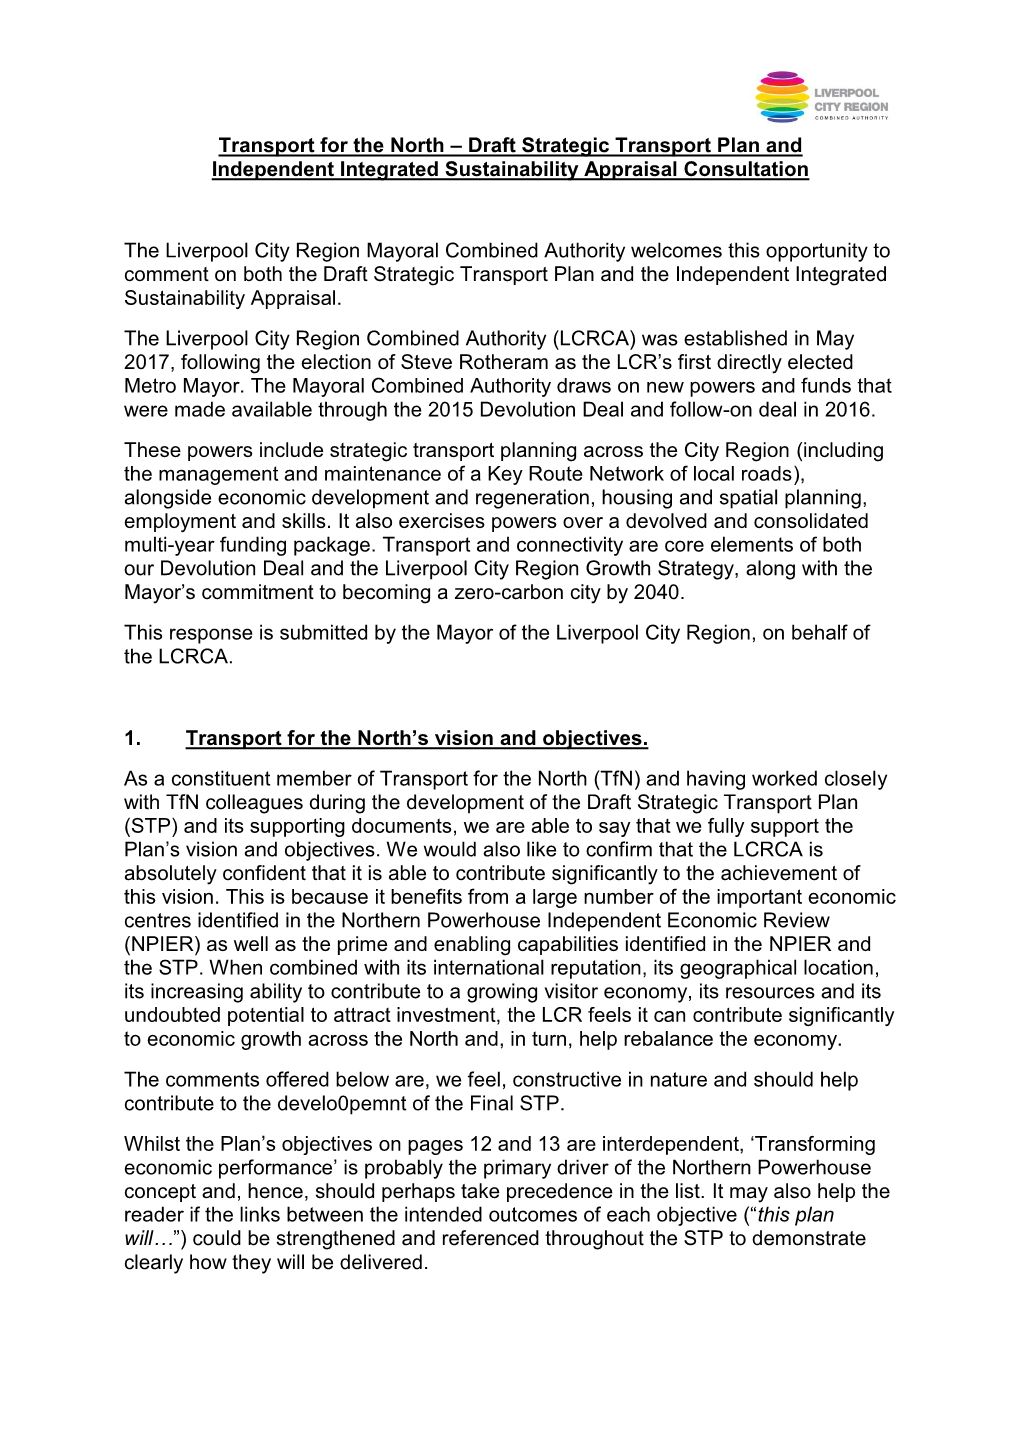 Transport for the North – Draft Strategic Transport Plan and Independent Integrated Sustainability Appraisal Consultation